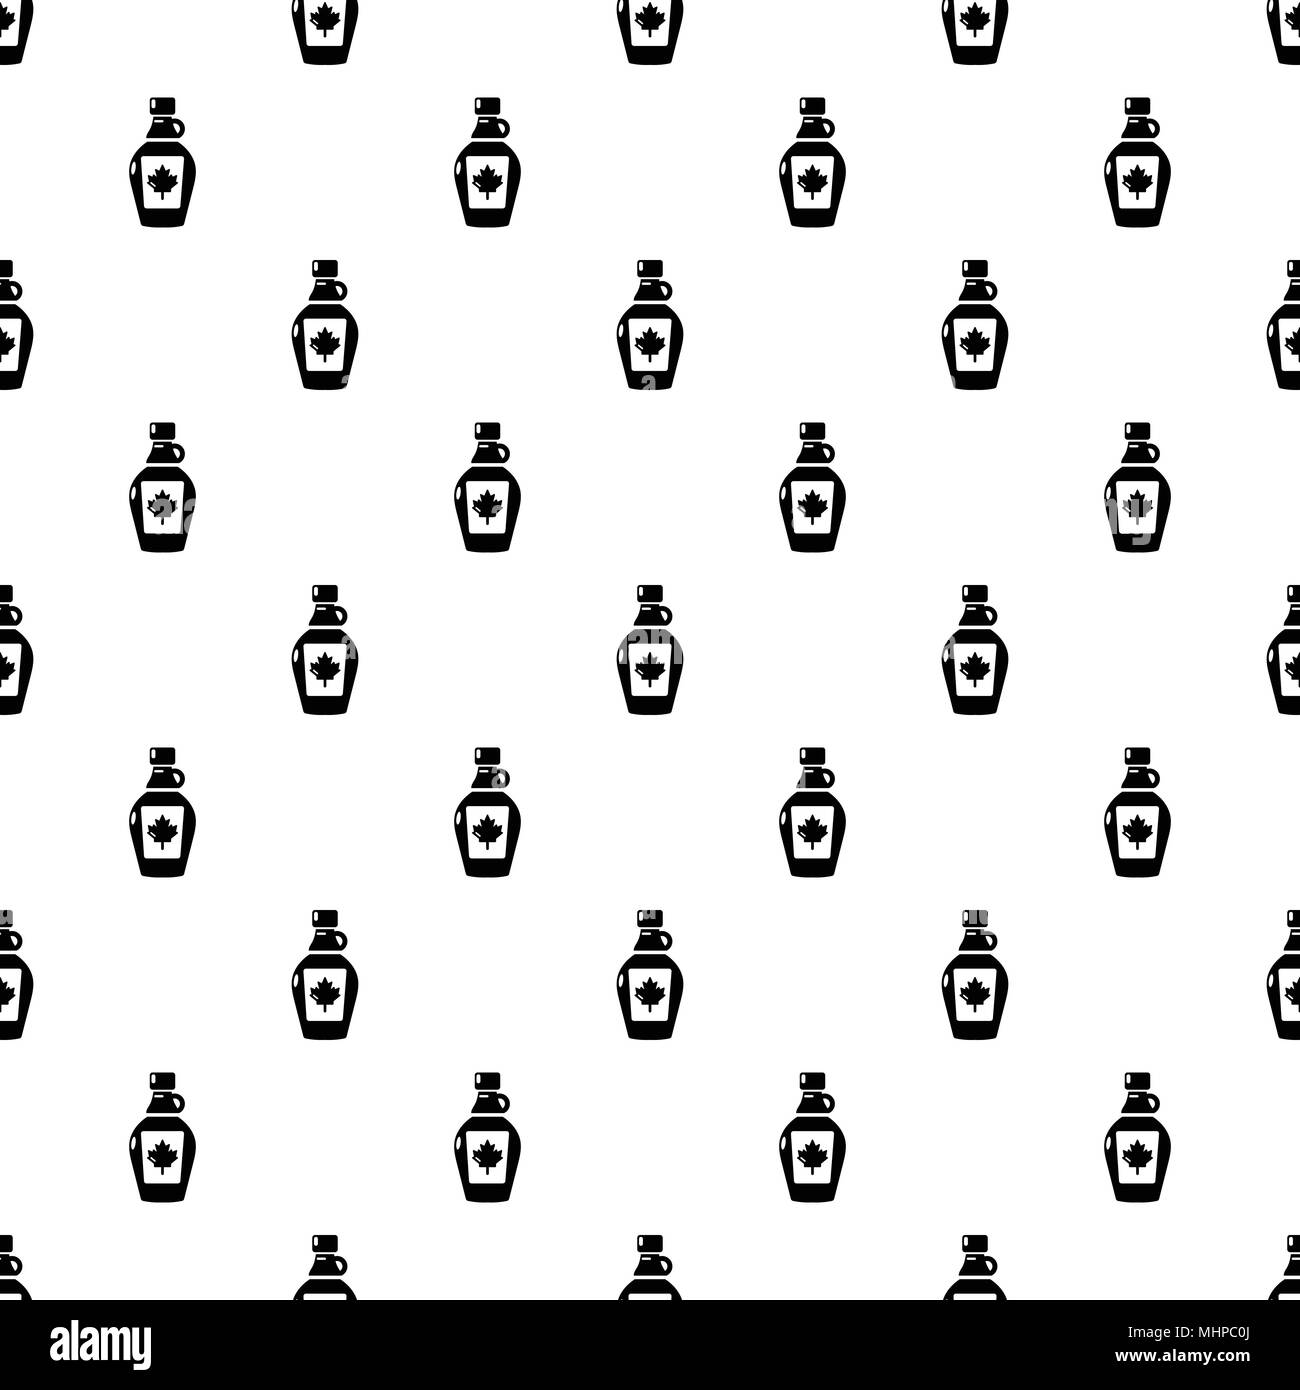 Maple syrup pattern vector seamless Stock Vector